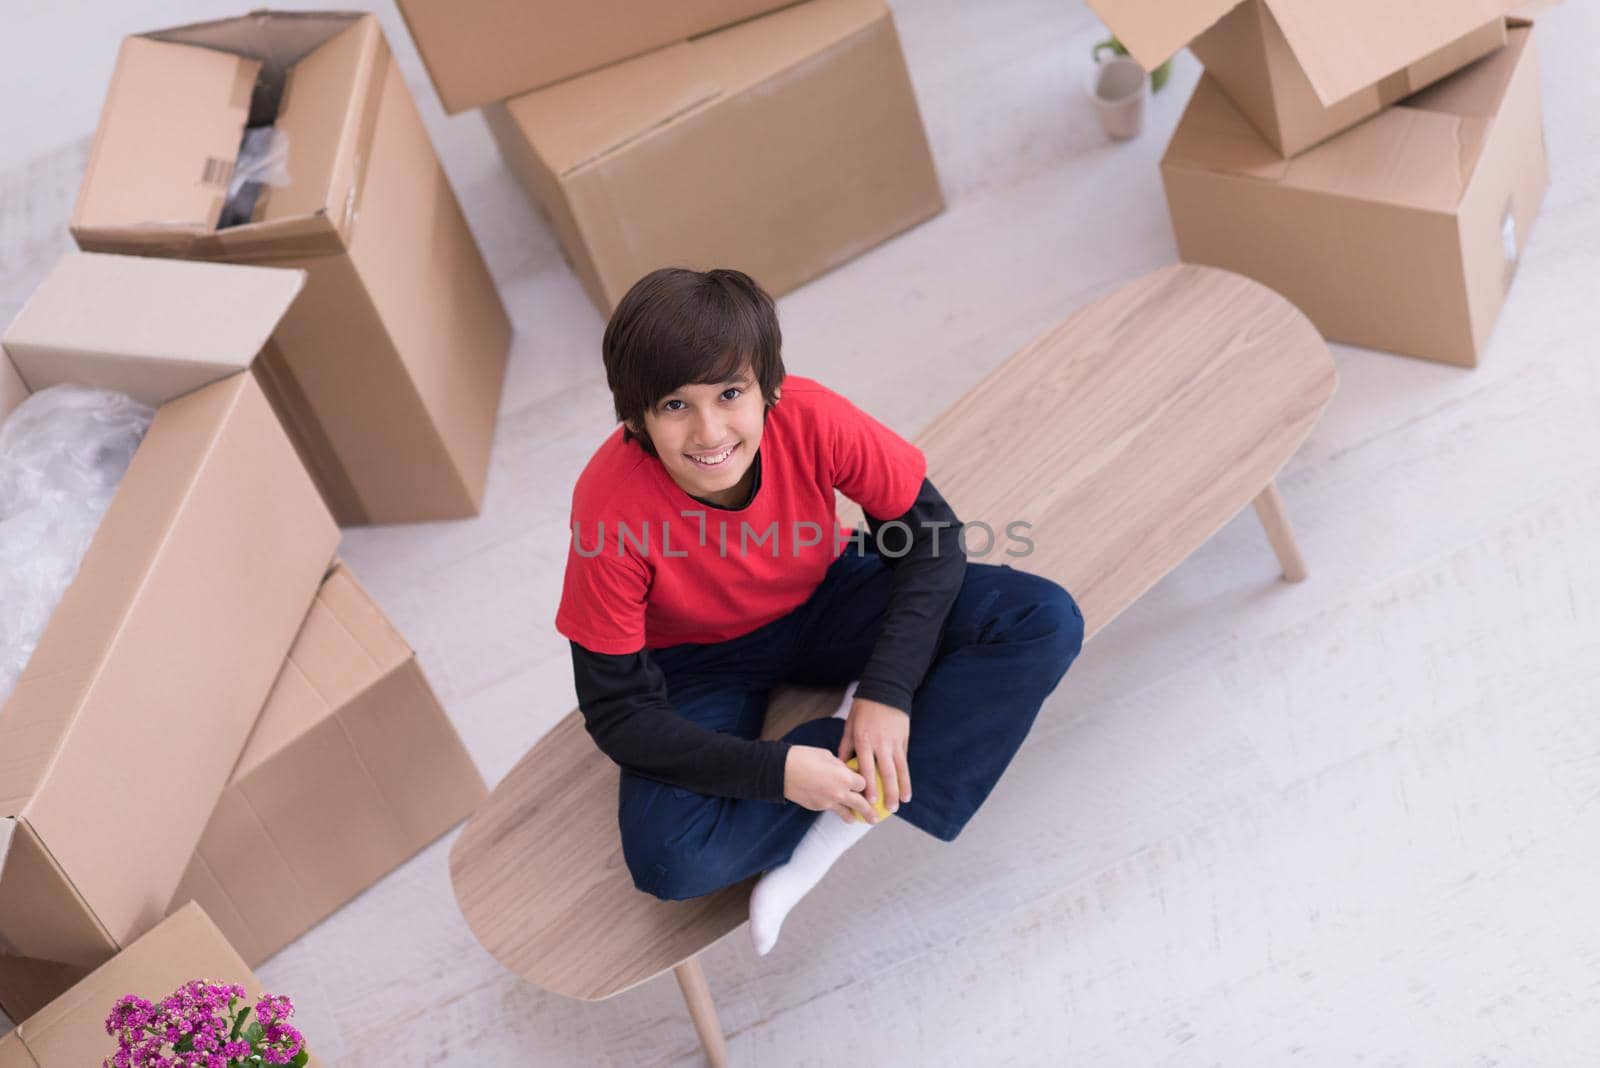 happy little boy sitting on the table with cardboard boxes around him in a new modern home,top view